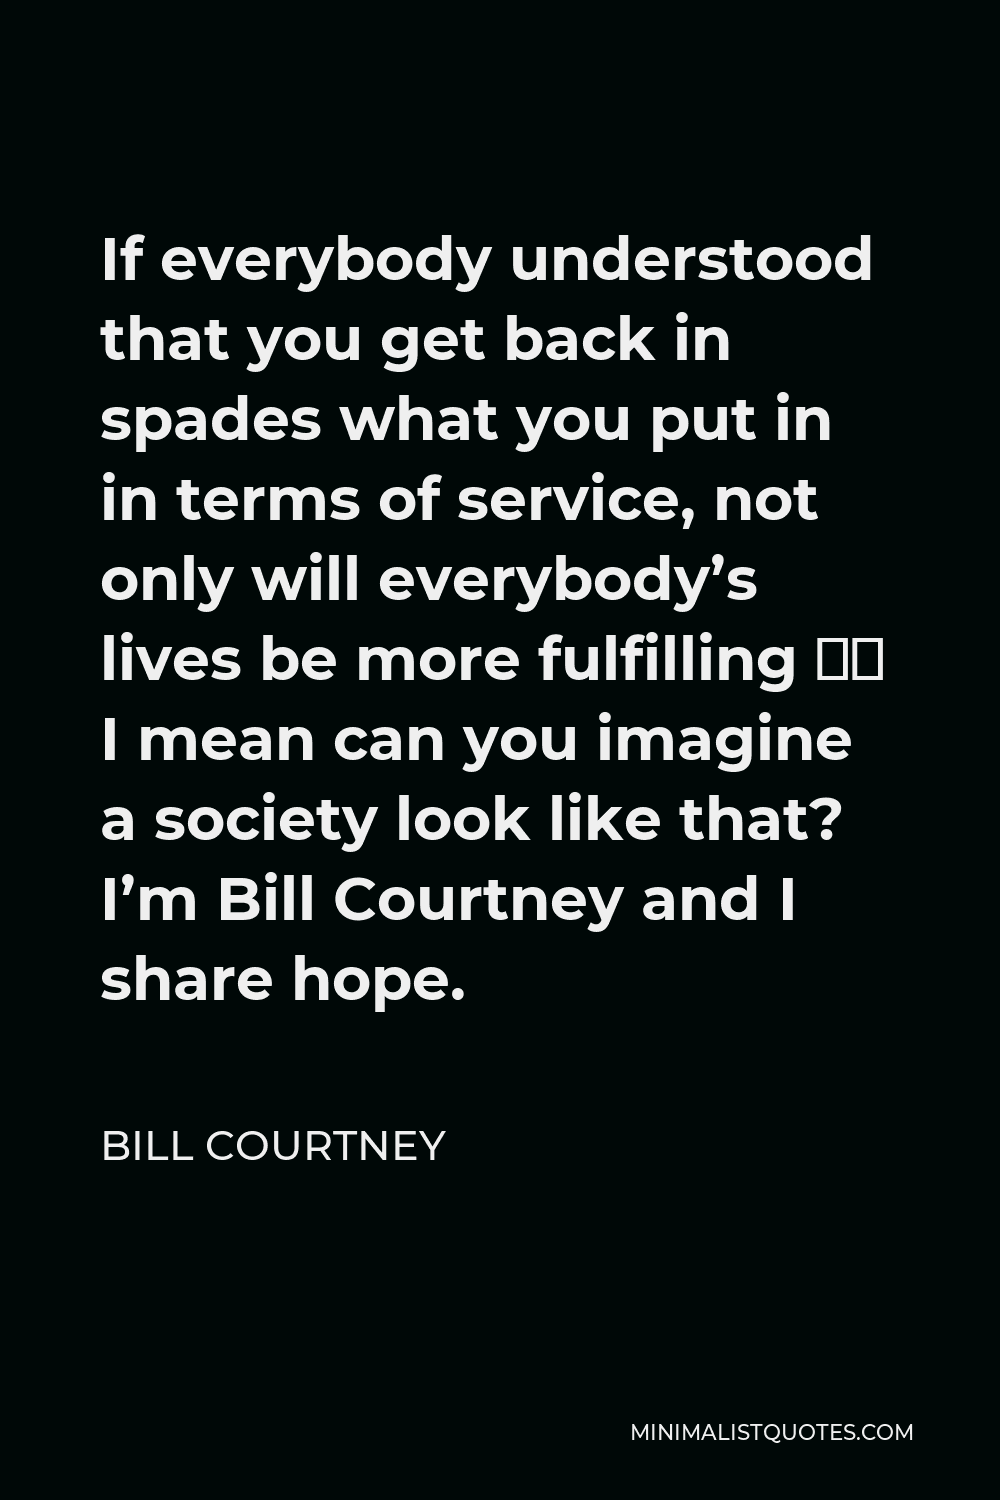 Bill Courtney Quote - If everybody understood that you get back in spades what you put in in terms of service, not only will everybody’s lives be more fulfilling – I mean can you imagine a society look like that? I’m Bill Courtney and I share hope.